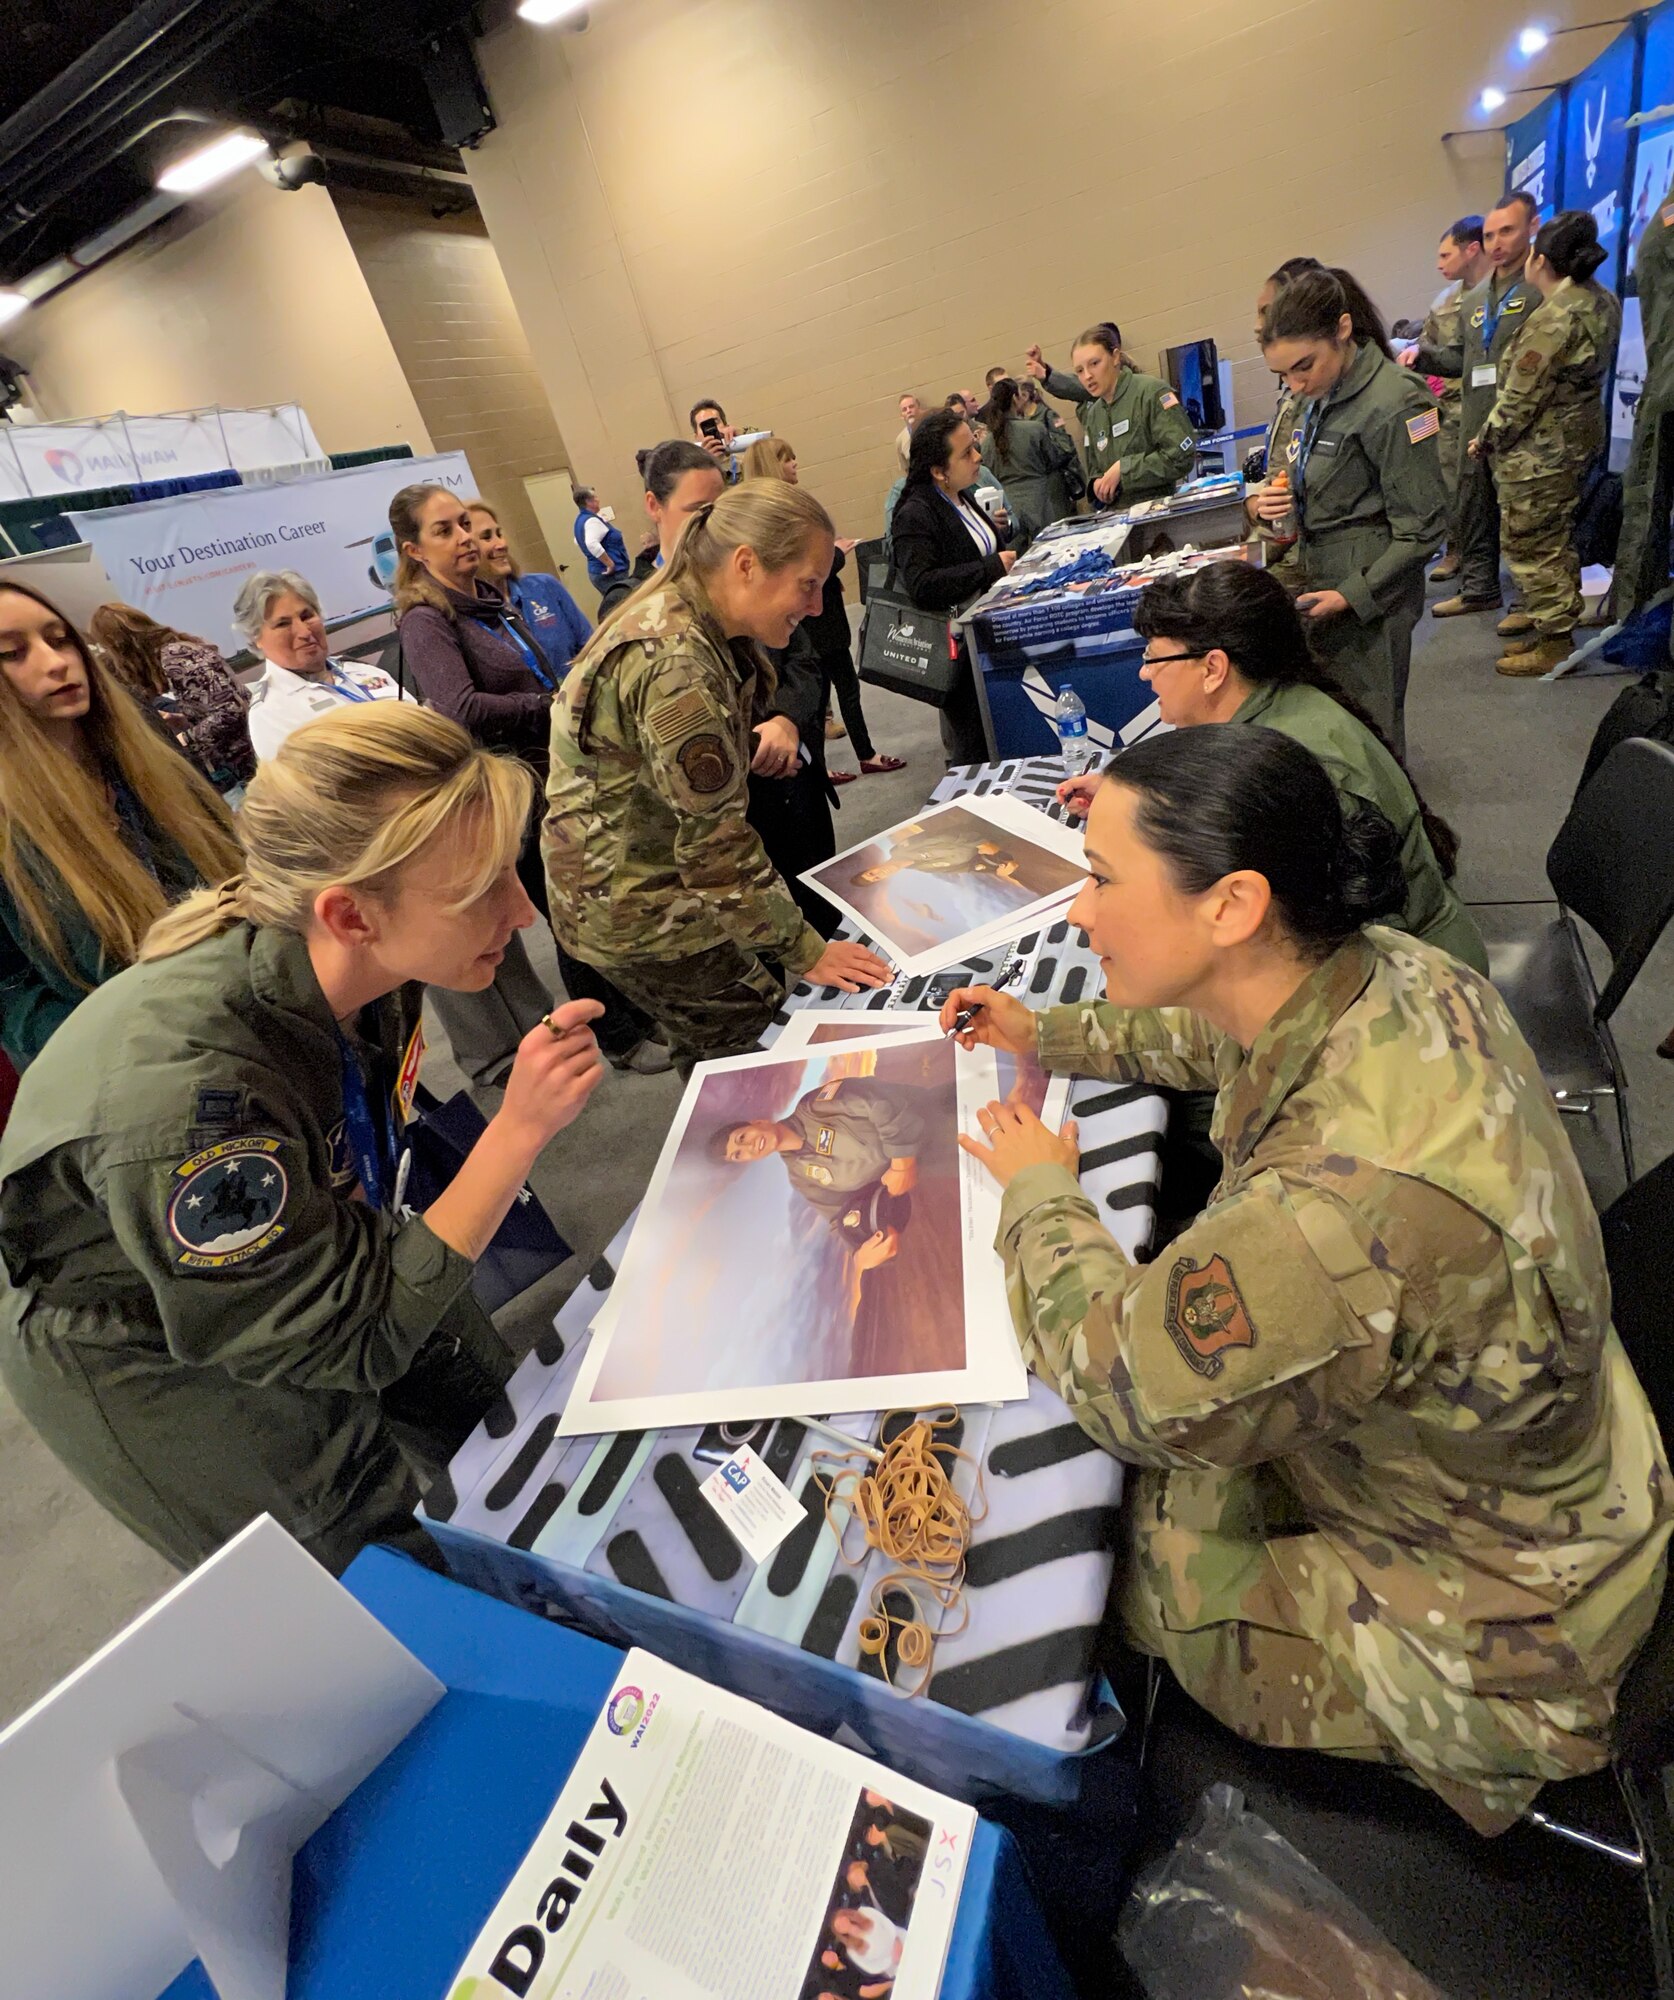 Female Airmen line up to get signatures from U.S. Air Force Reserve Col. (ret.) Kathy Cosand (left), AFRC’s first female pilot, and 2nd Lt. Kat Justen (right), Air Force Reserve Command Office of History and Heritage combat artist